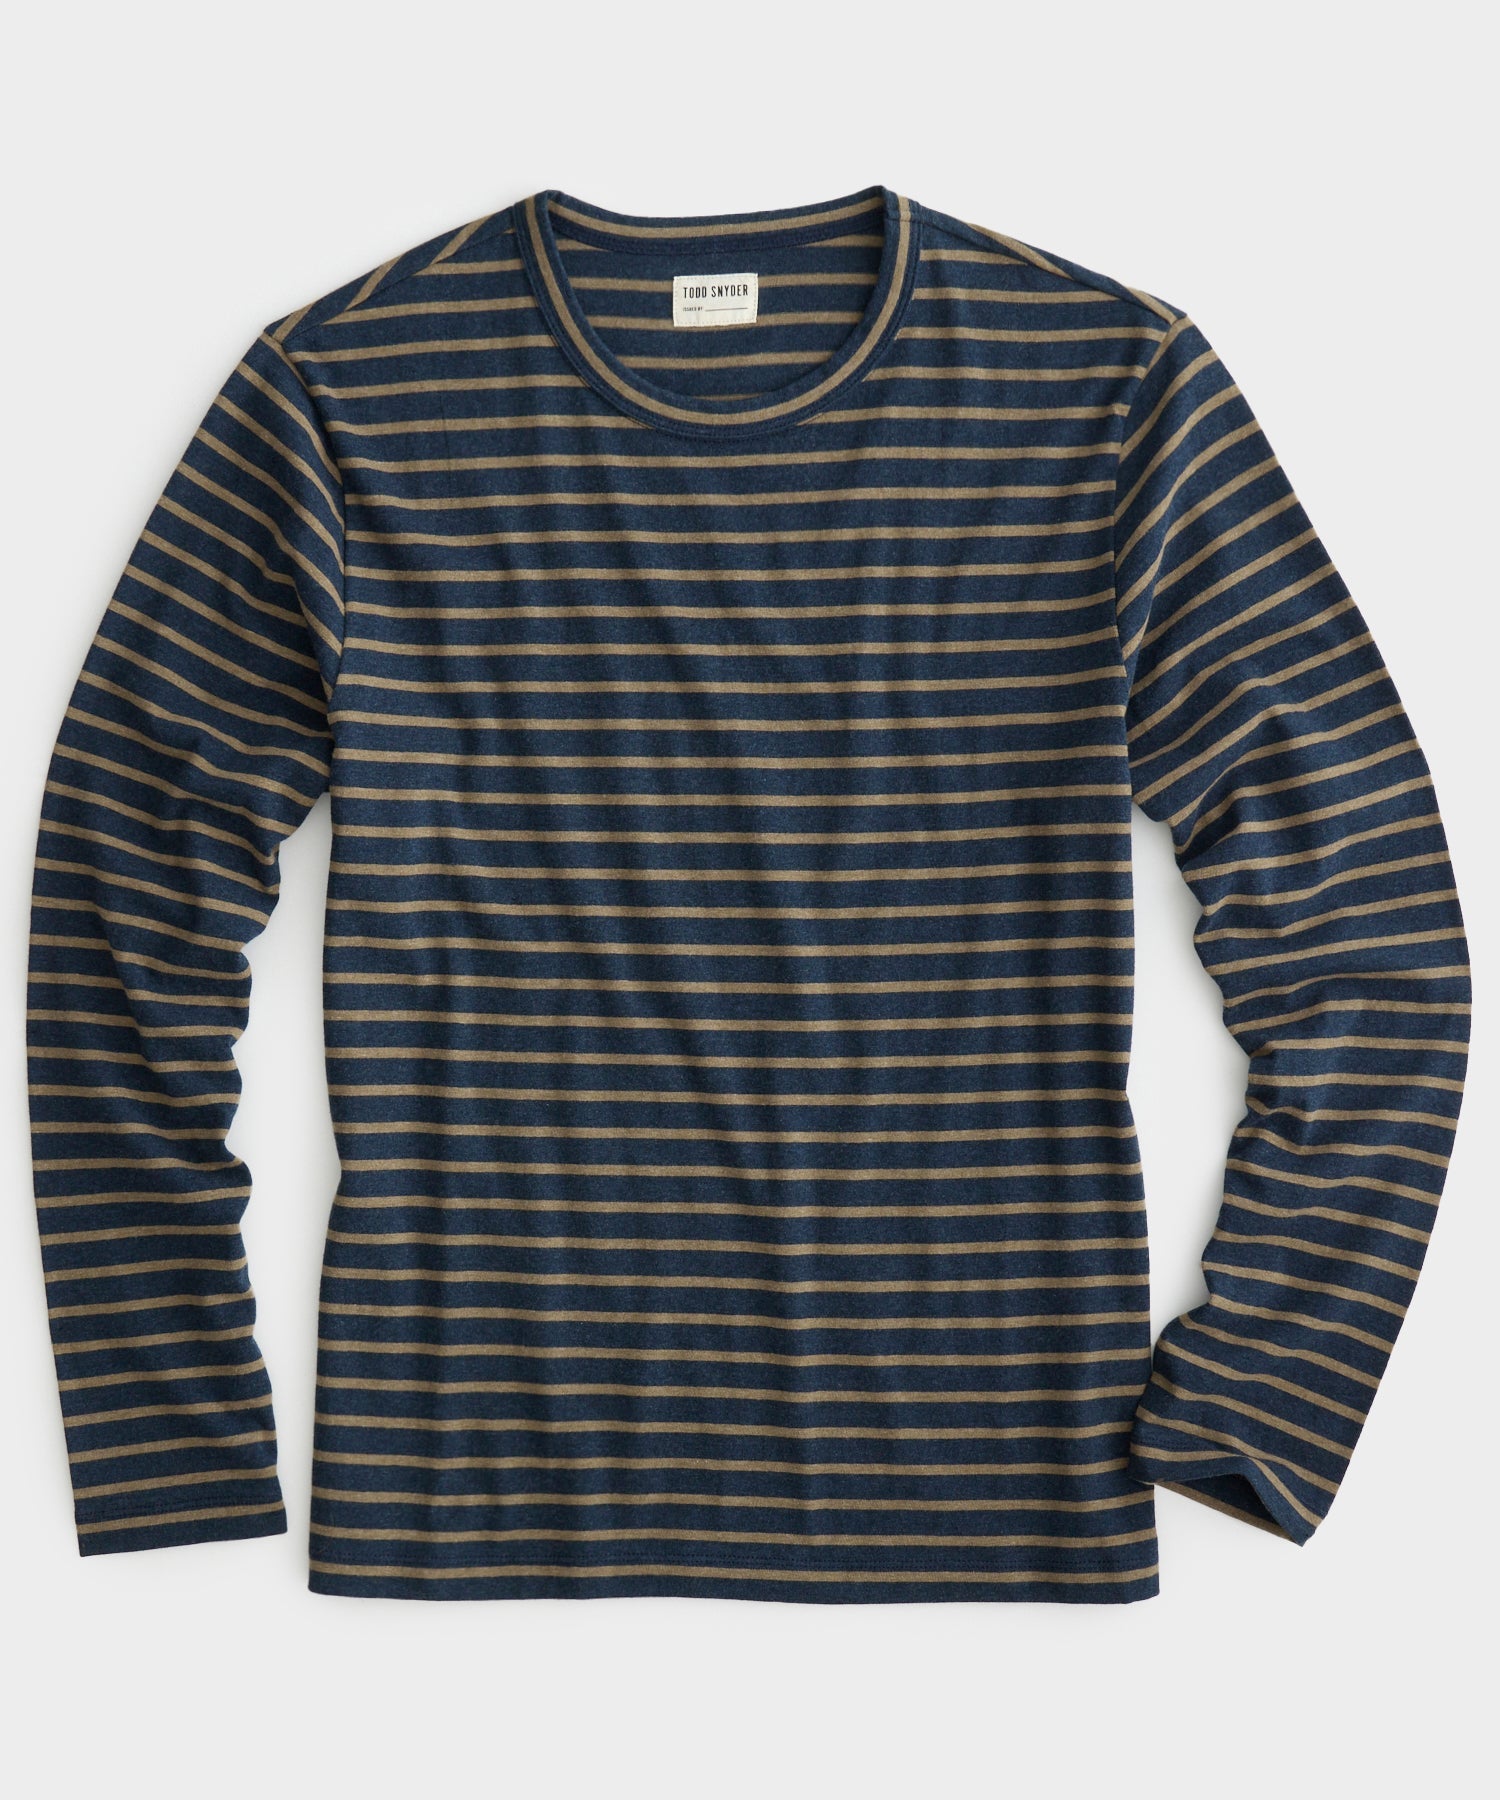 Issued By: Japanese Nautical Striped Tee in Railings